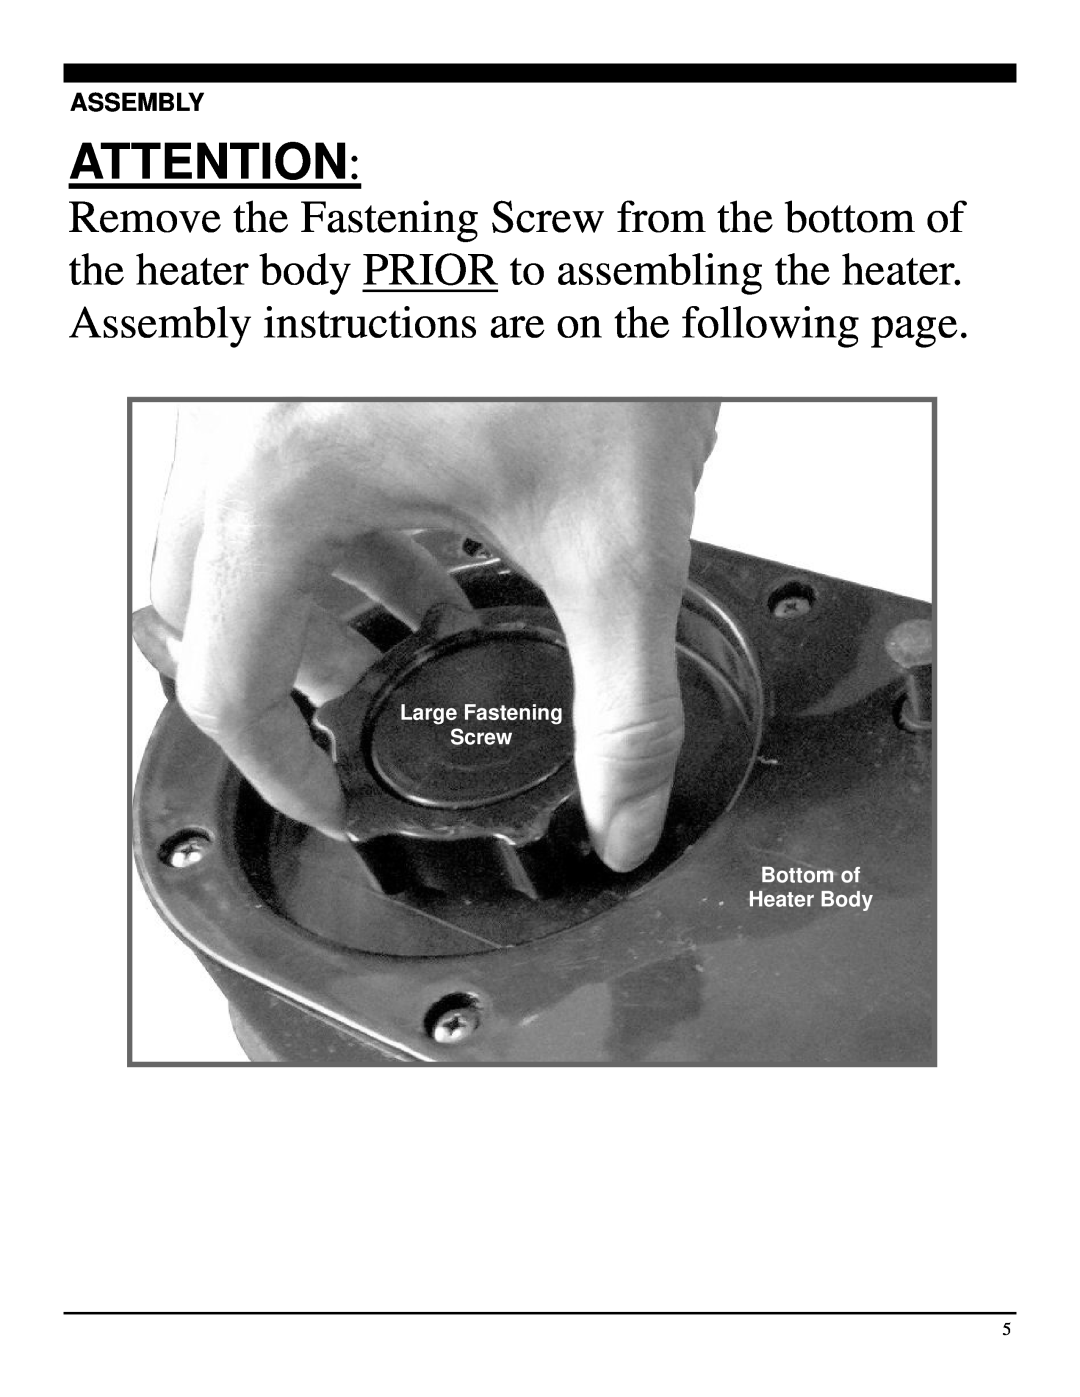 Soleus Air HR1-08R-21 operating instructions Assembly, Large Fastening Screw Bottom of Heater Body 